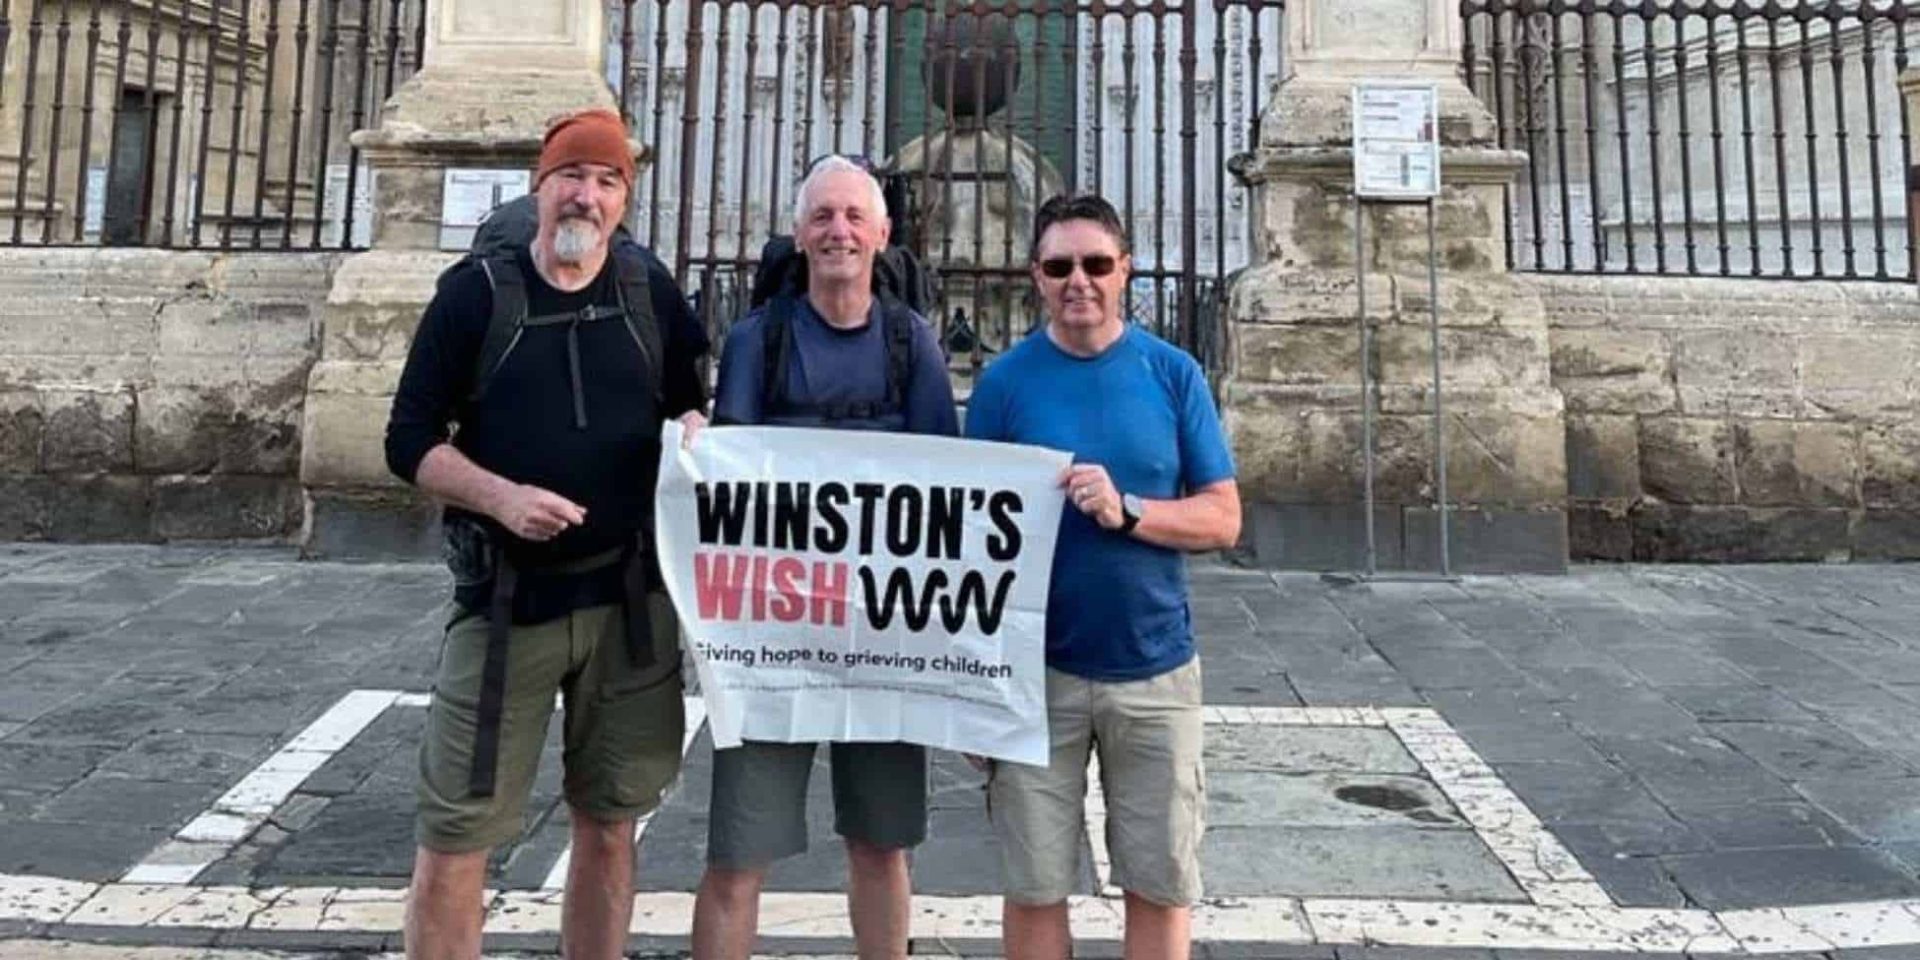 Barry, Alec and another man standing in front of a cathedral in Spain holding a Winston's Wish banner